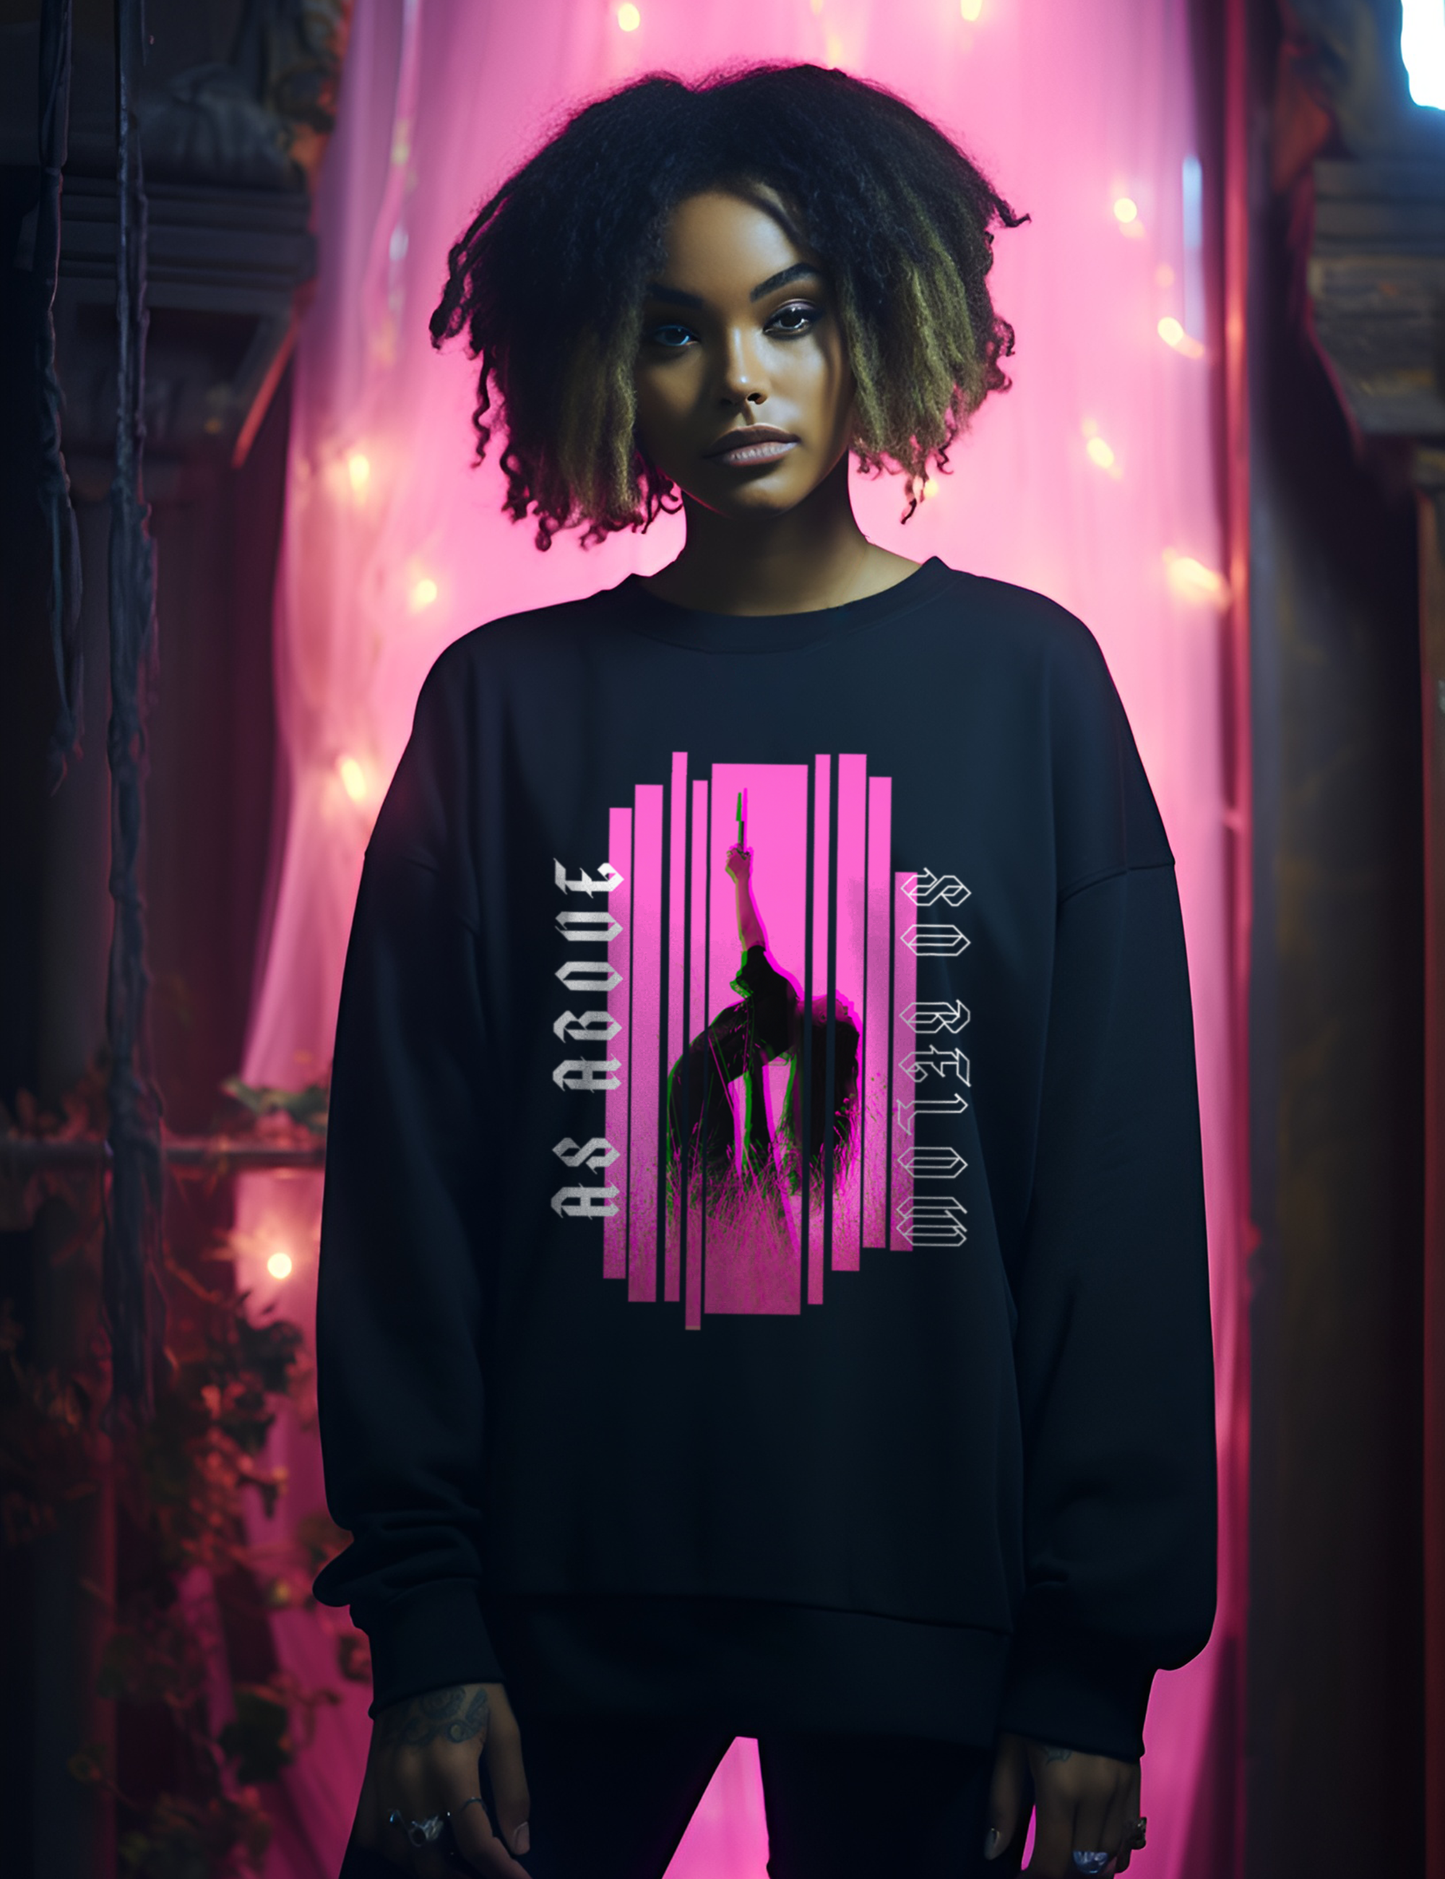 As Above So Below Glitch Witchy Plus Size Goth Edgy Occult Clothing Sweatshirt